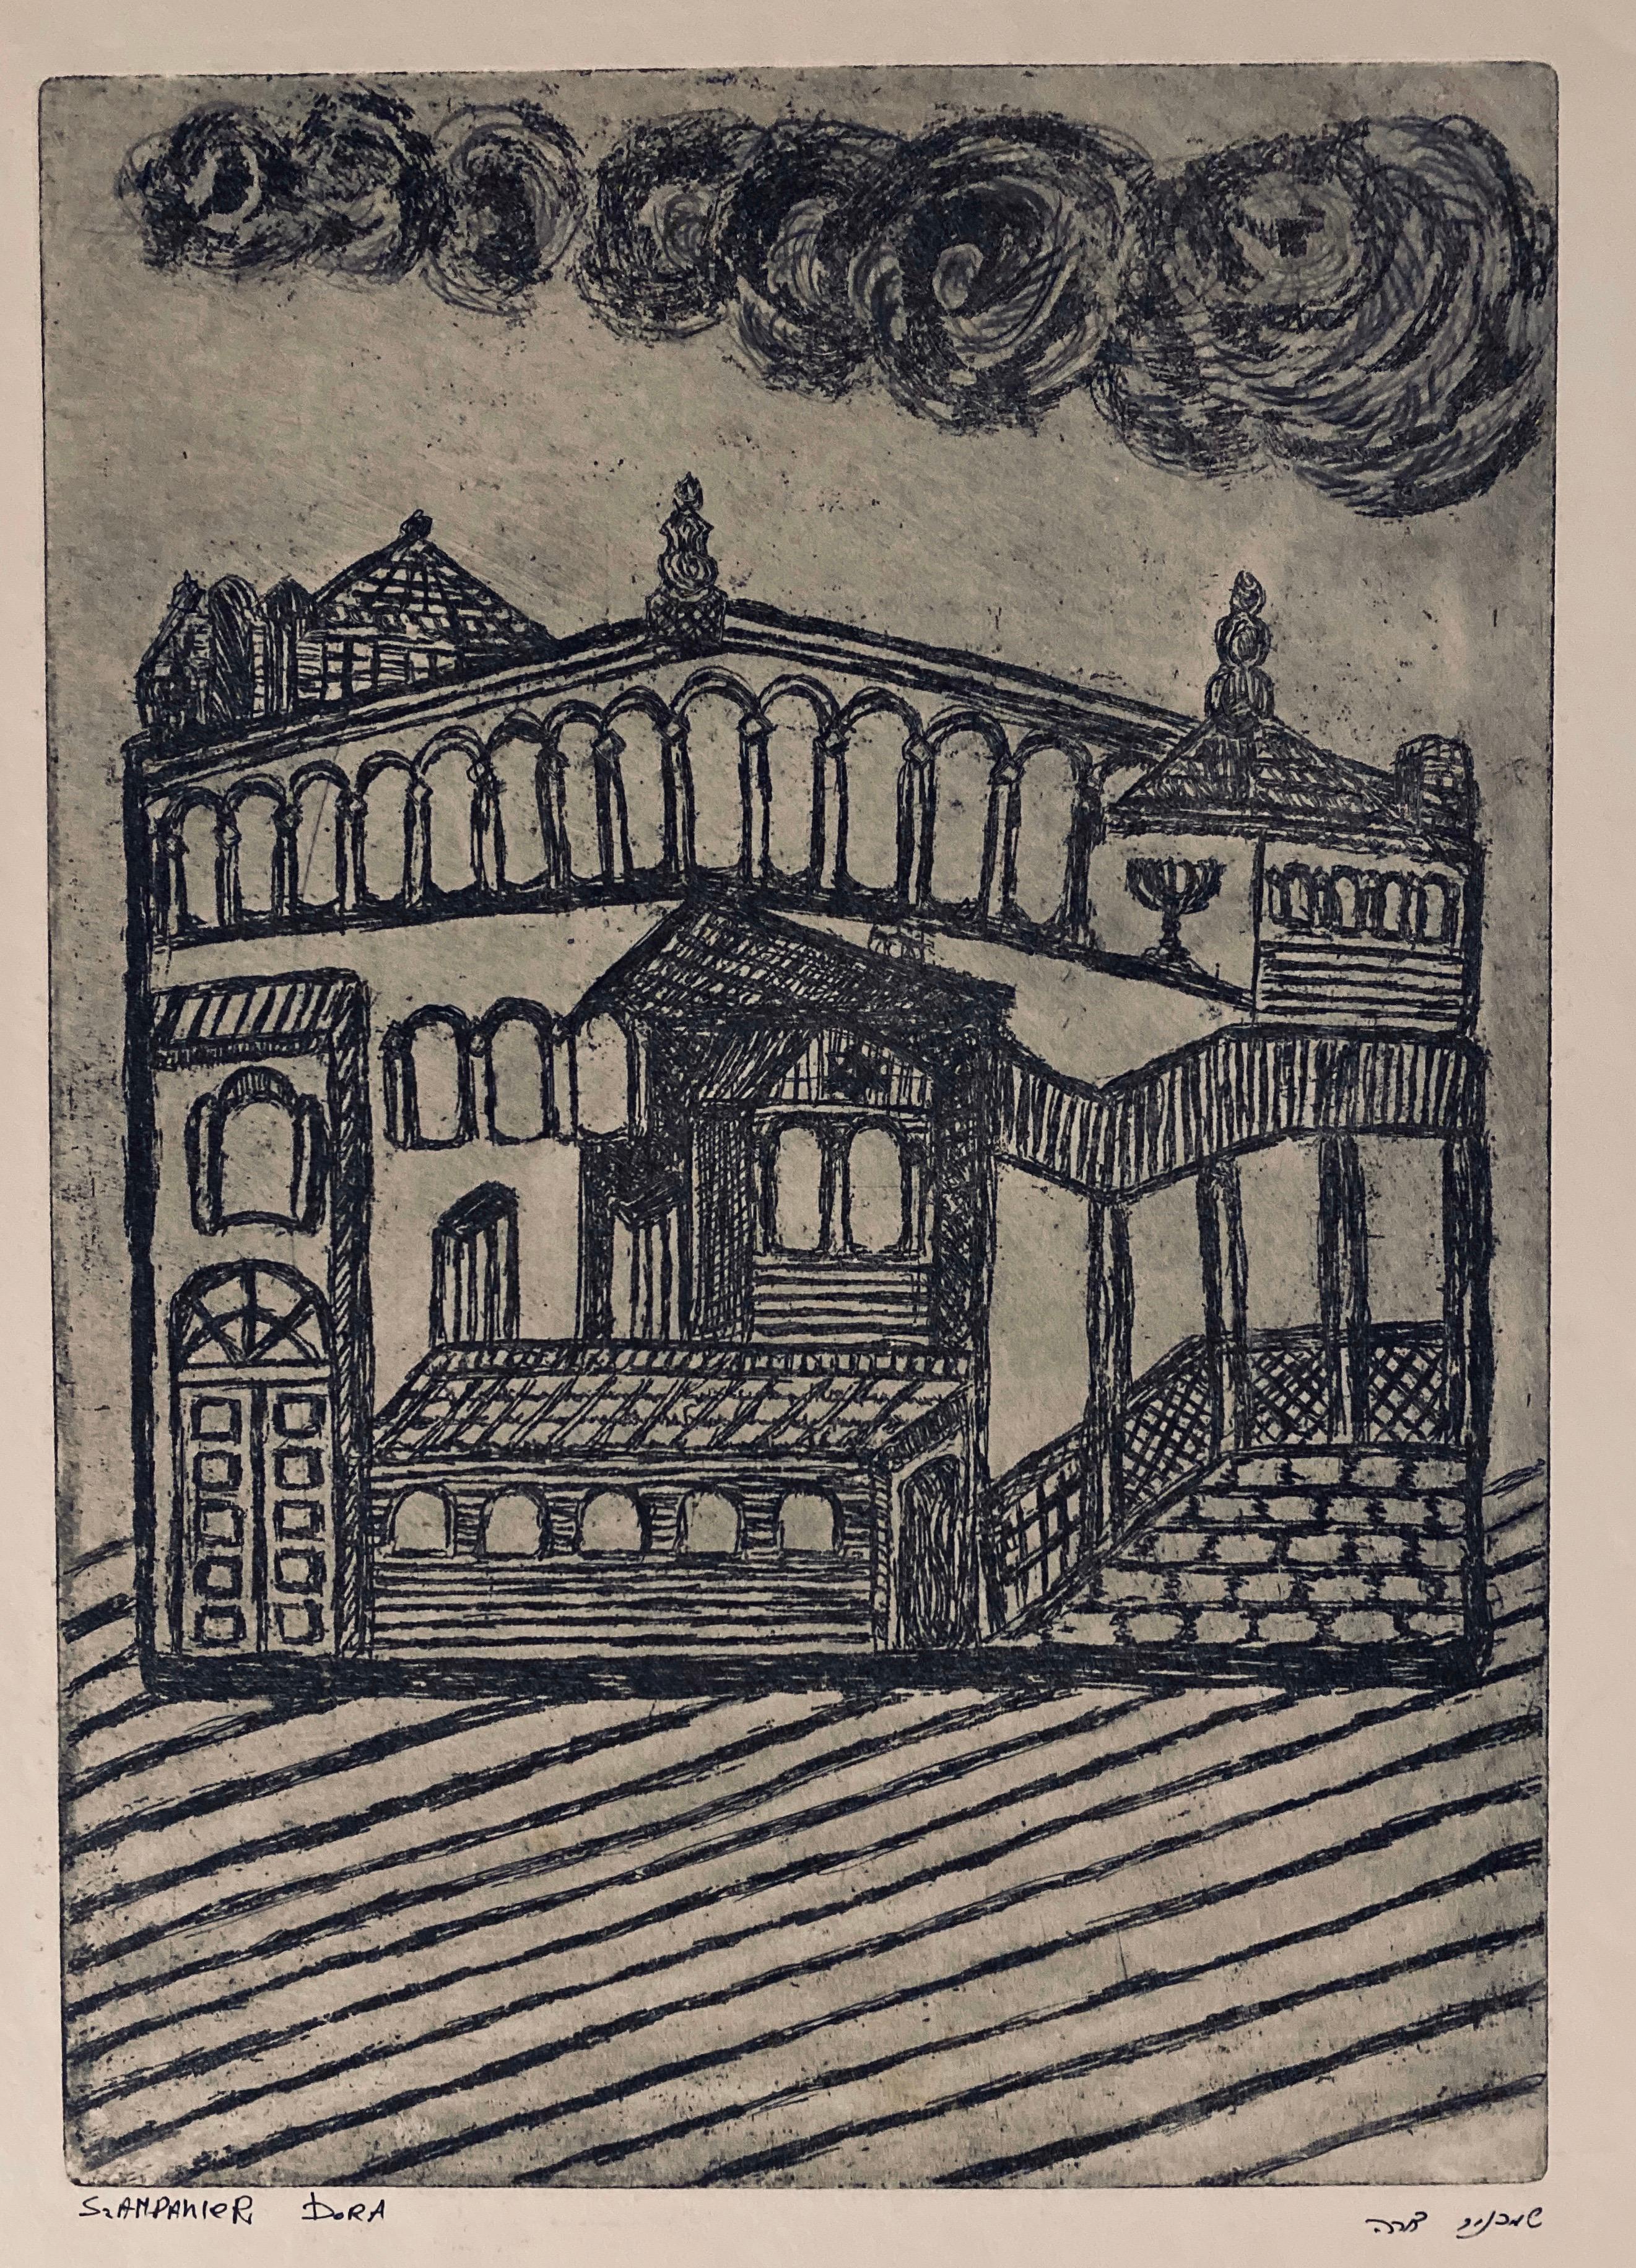 Etching of destroyed synagogue - Cracow, Poland  - Print by Dora Szampanier